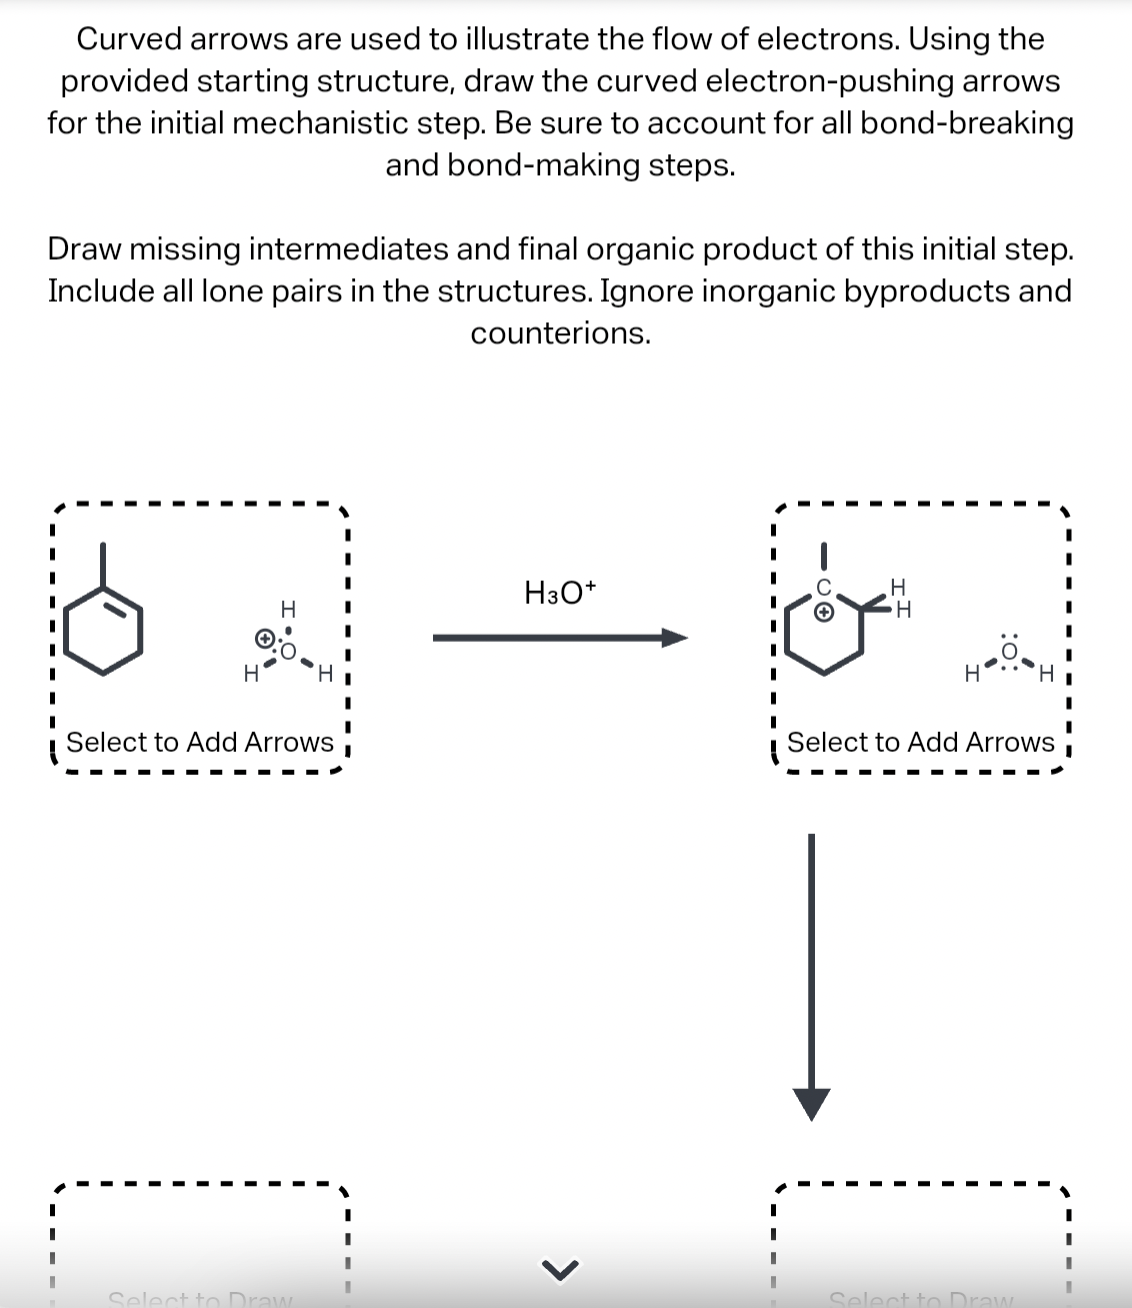 Curved arrows are used to illustrate the flow of electrons. Using the
provided starting structure, draw the curved electron-pushing arrows
for the initial mechanistic step. Be sure to account for all bond-breaking
and bond-making steps.
Draw missing intermediates and final organic product of this initial step.
Include all lone pairs in the structures. Ignore inorganic byproducts and
counterions.
I
H
H
Select to Add Arrows
Select to Draw
H3O+
>
-CO
H
H
H
Select to Add Arrows
Select to Draw